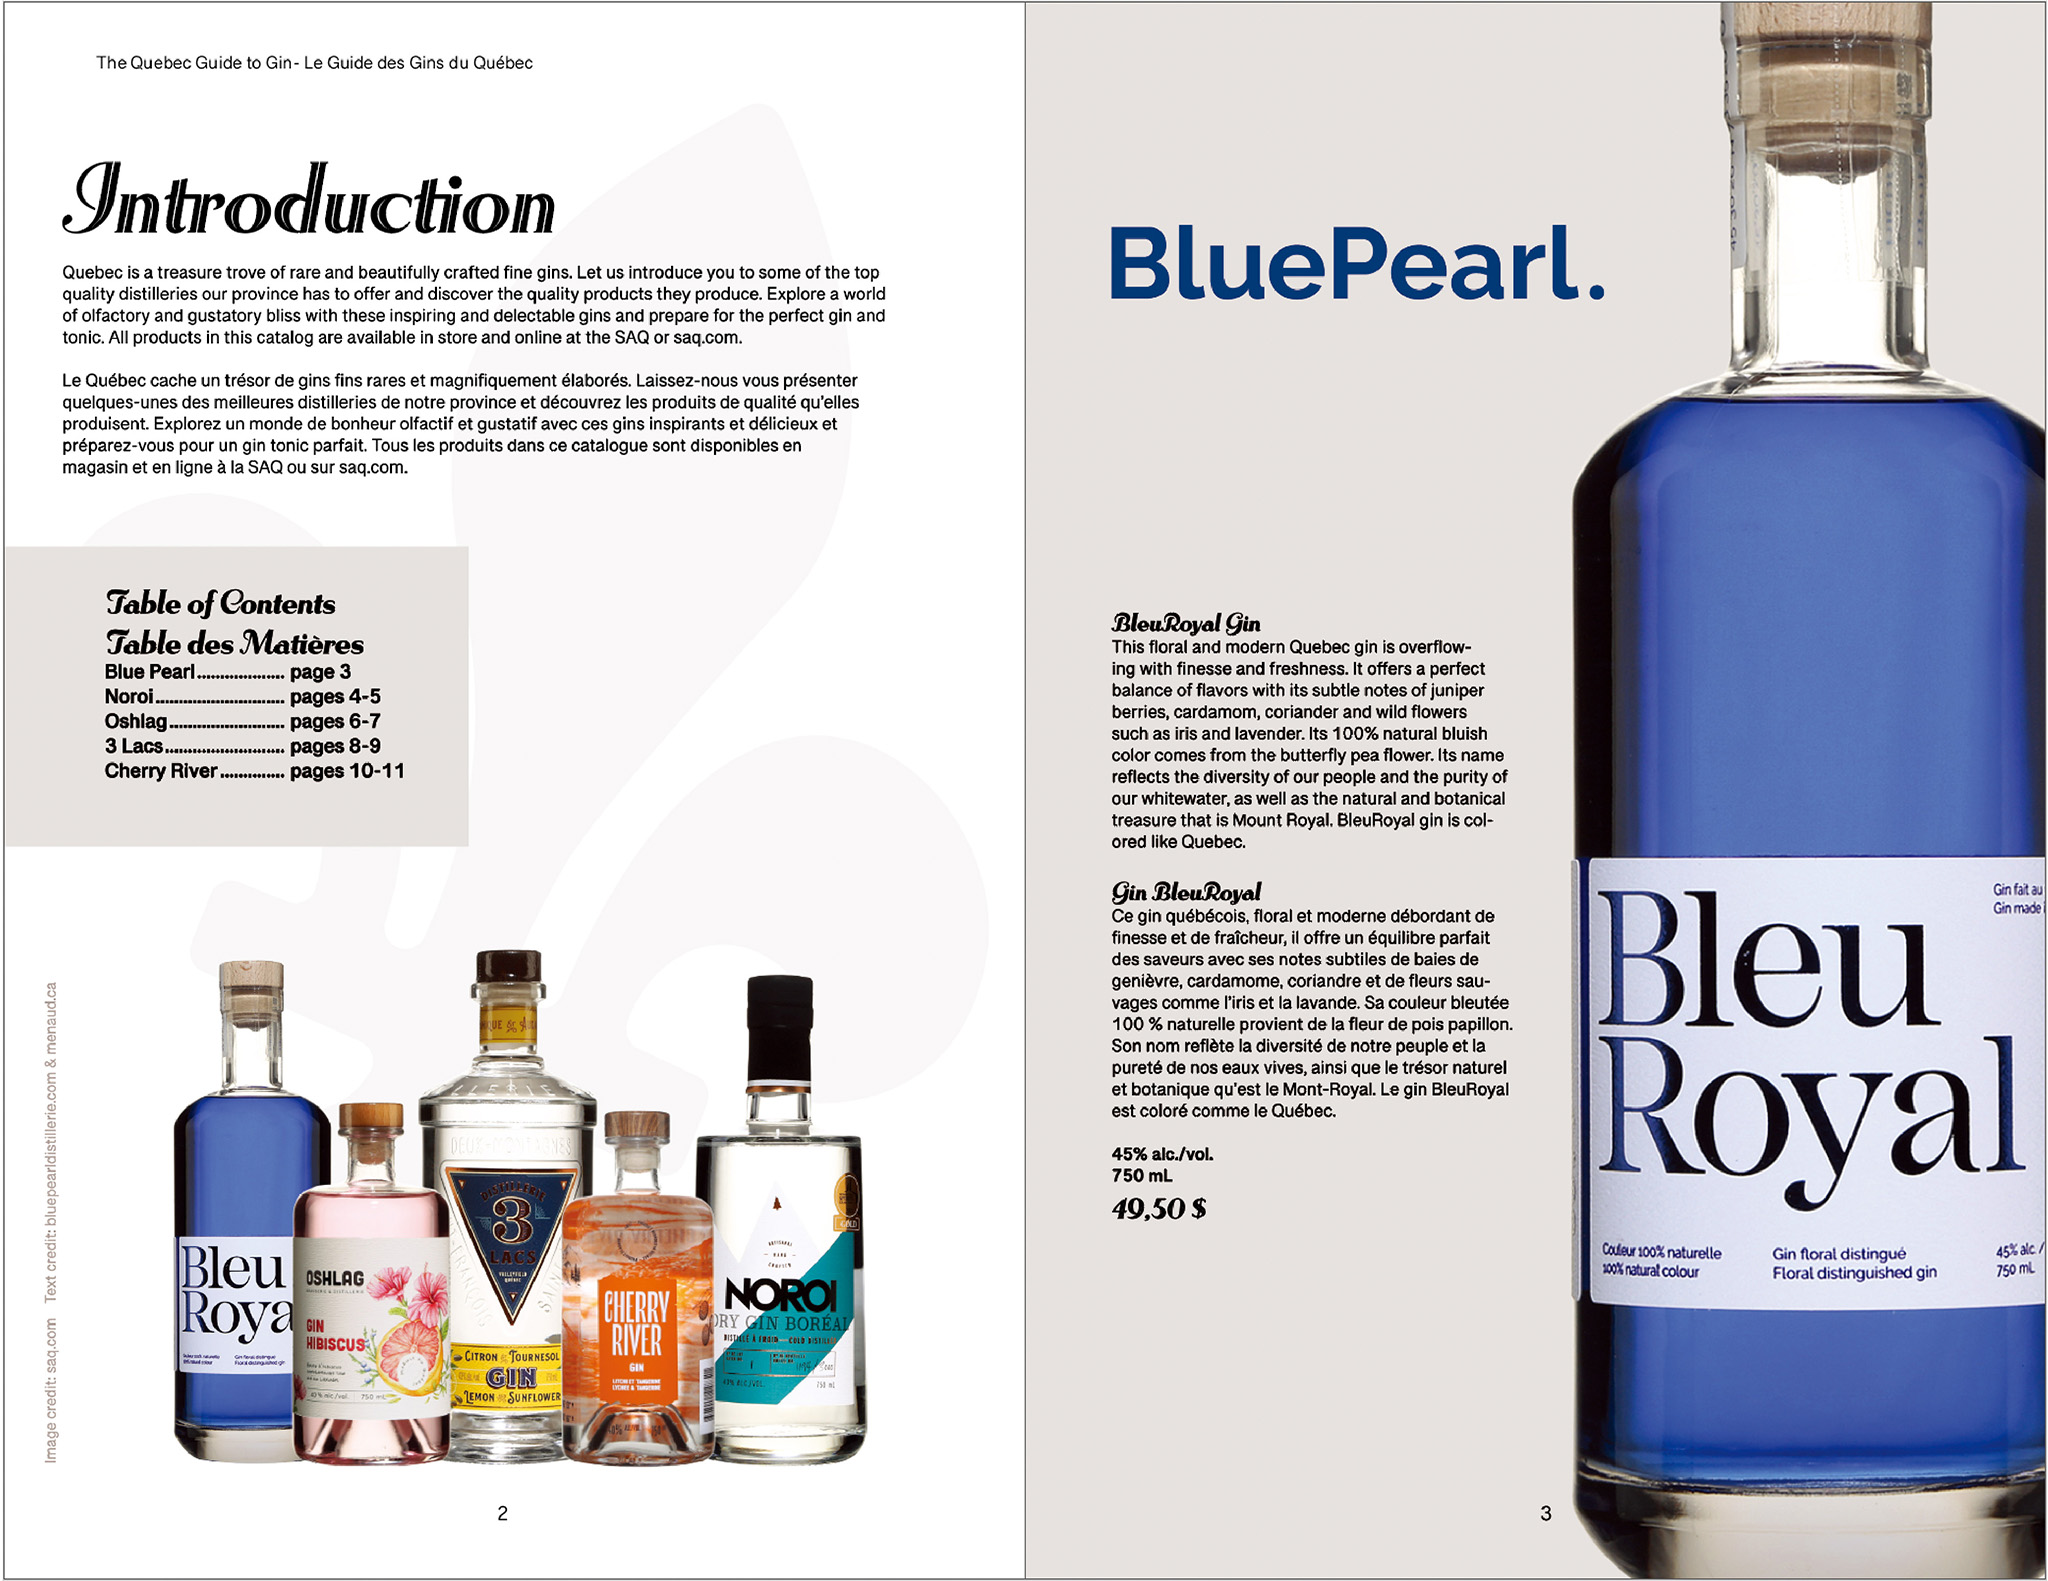 Catalog two page layout about Quebec Gin. Left page includes introduction, table of contents and a selection of different gin bottles at the bottom with a faded fleur-de-lys in the background. Right page featured a very large bottle of Bleu Royal gin and BluePearl logo as well as description and price of the gin on beige background.